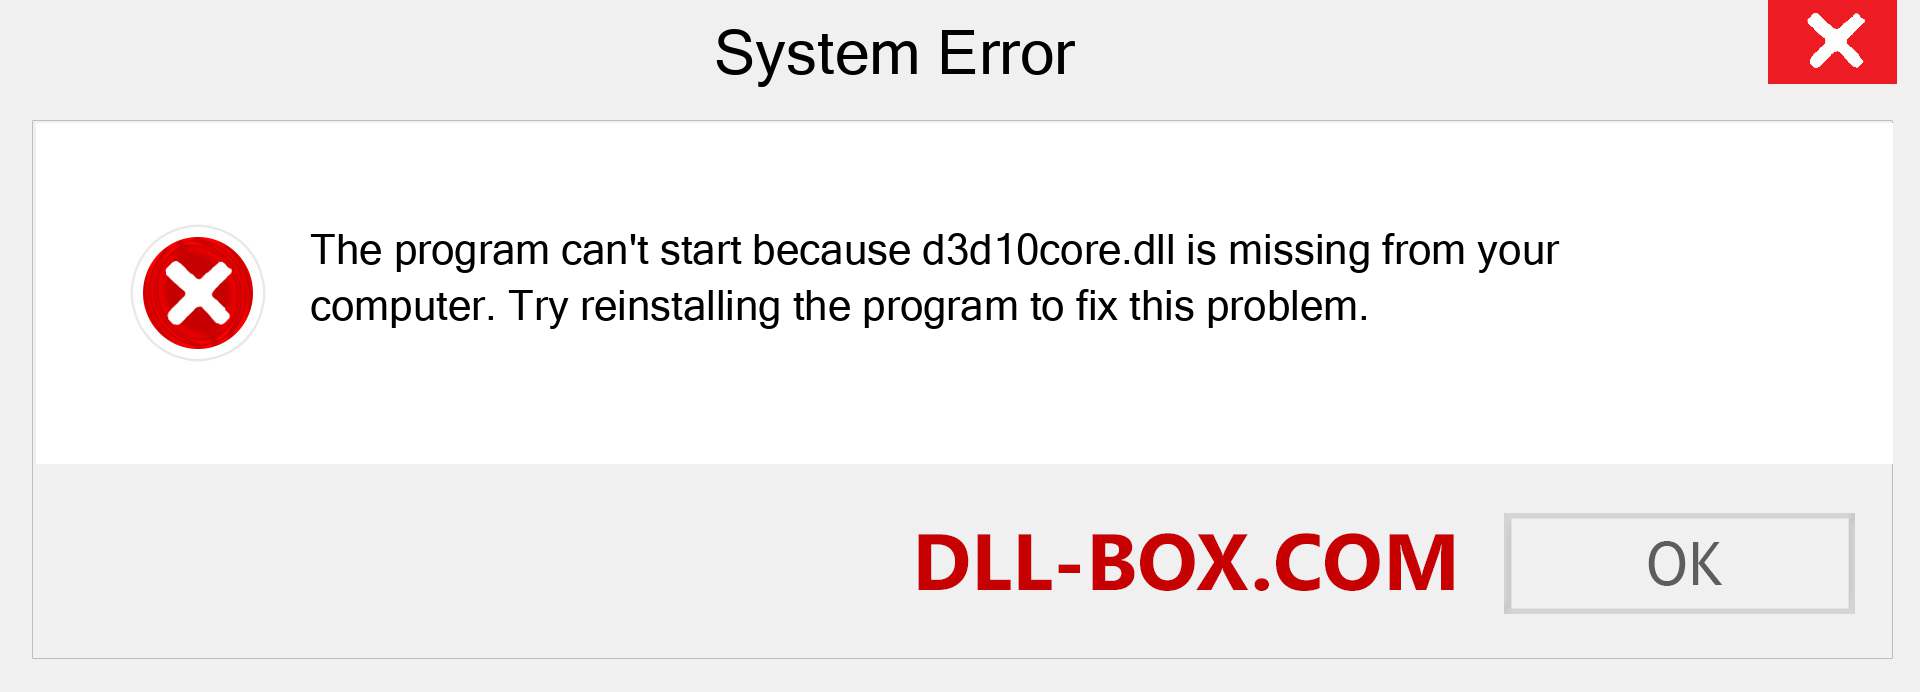  d3d10core.dll file is missing?. Download for Windows 7, 8, 10 - Fix  d3d10core dll Missing Error on Windows, photos, images